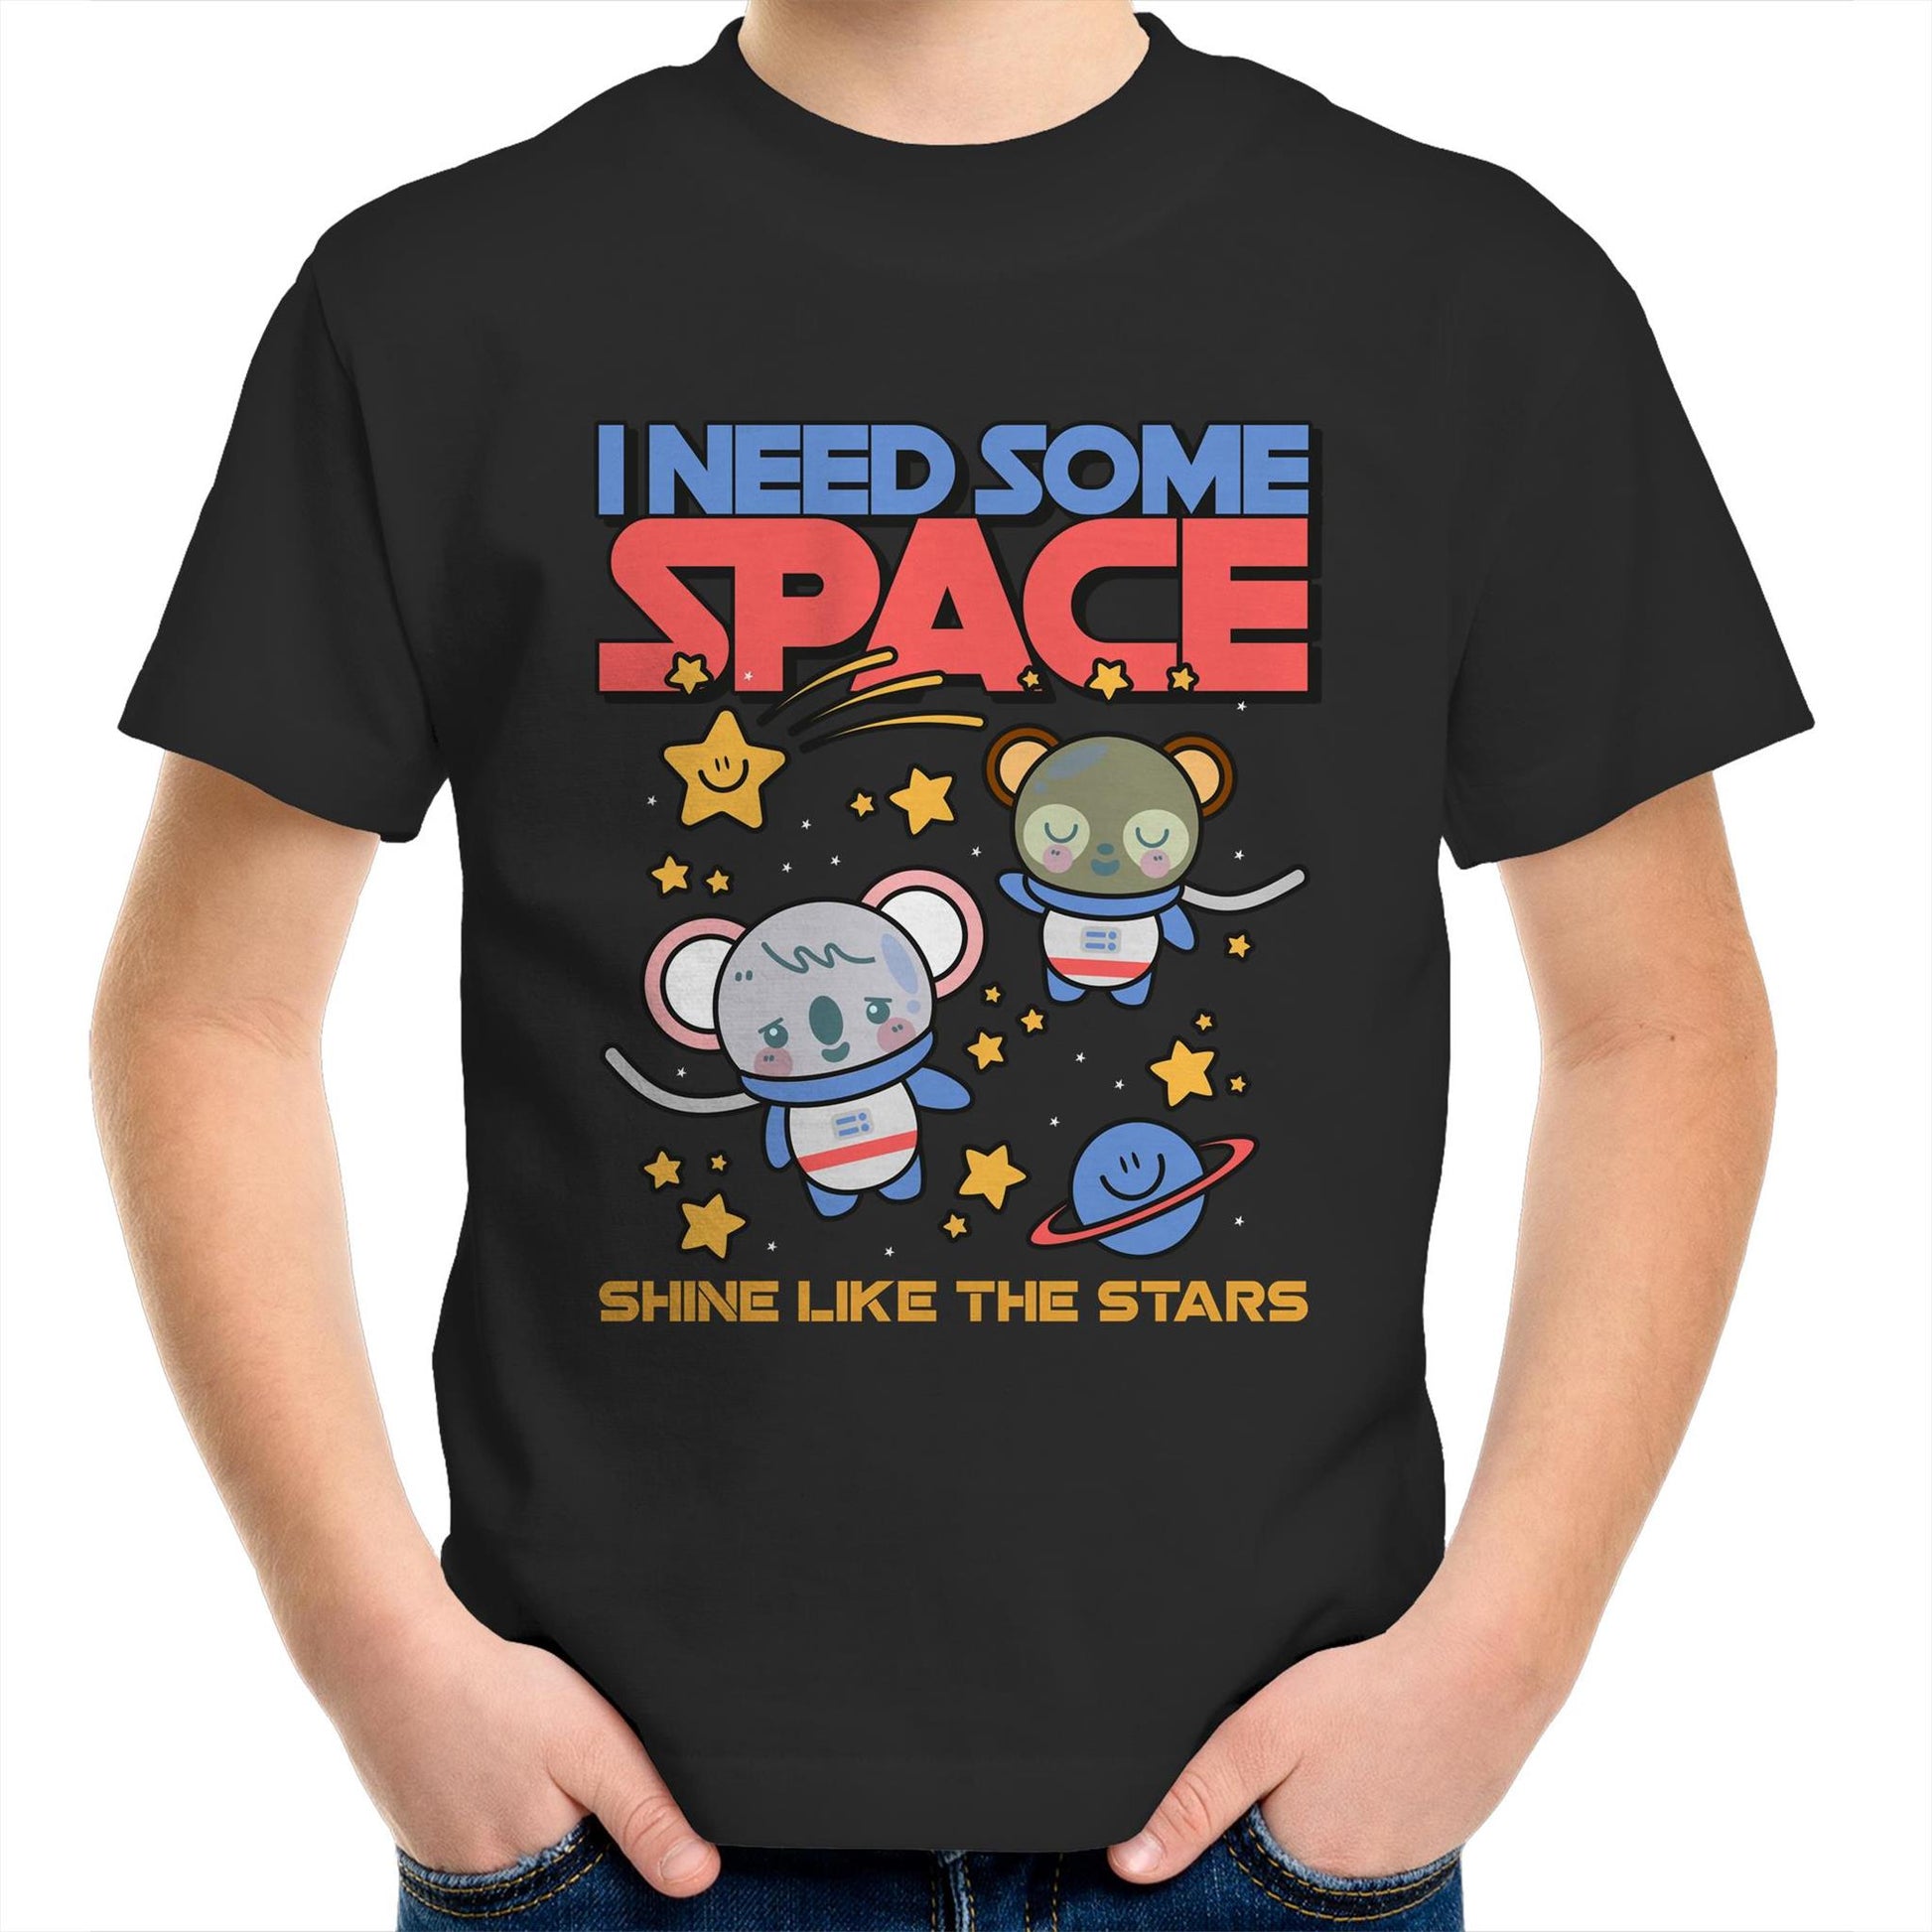 I Need Some Space - Kids Youth Crew T-Shirt Black Kids Youth T-shirt Space